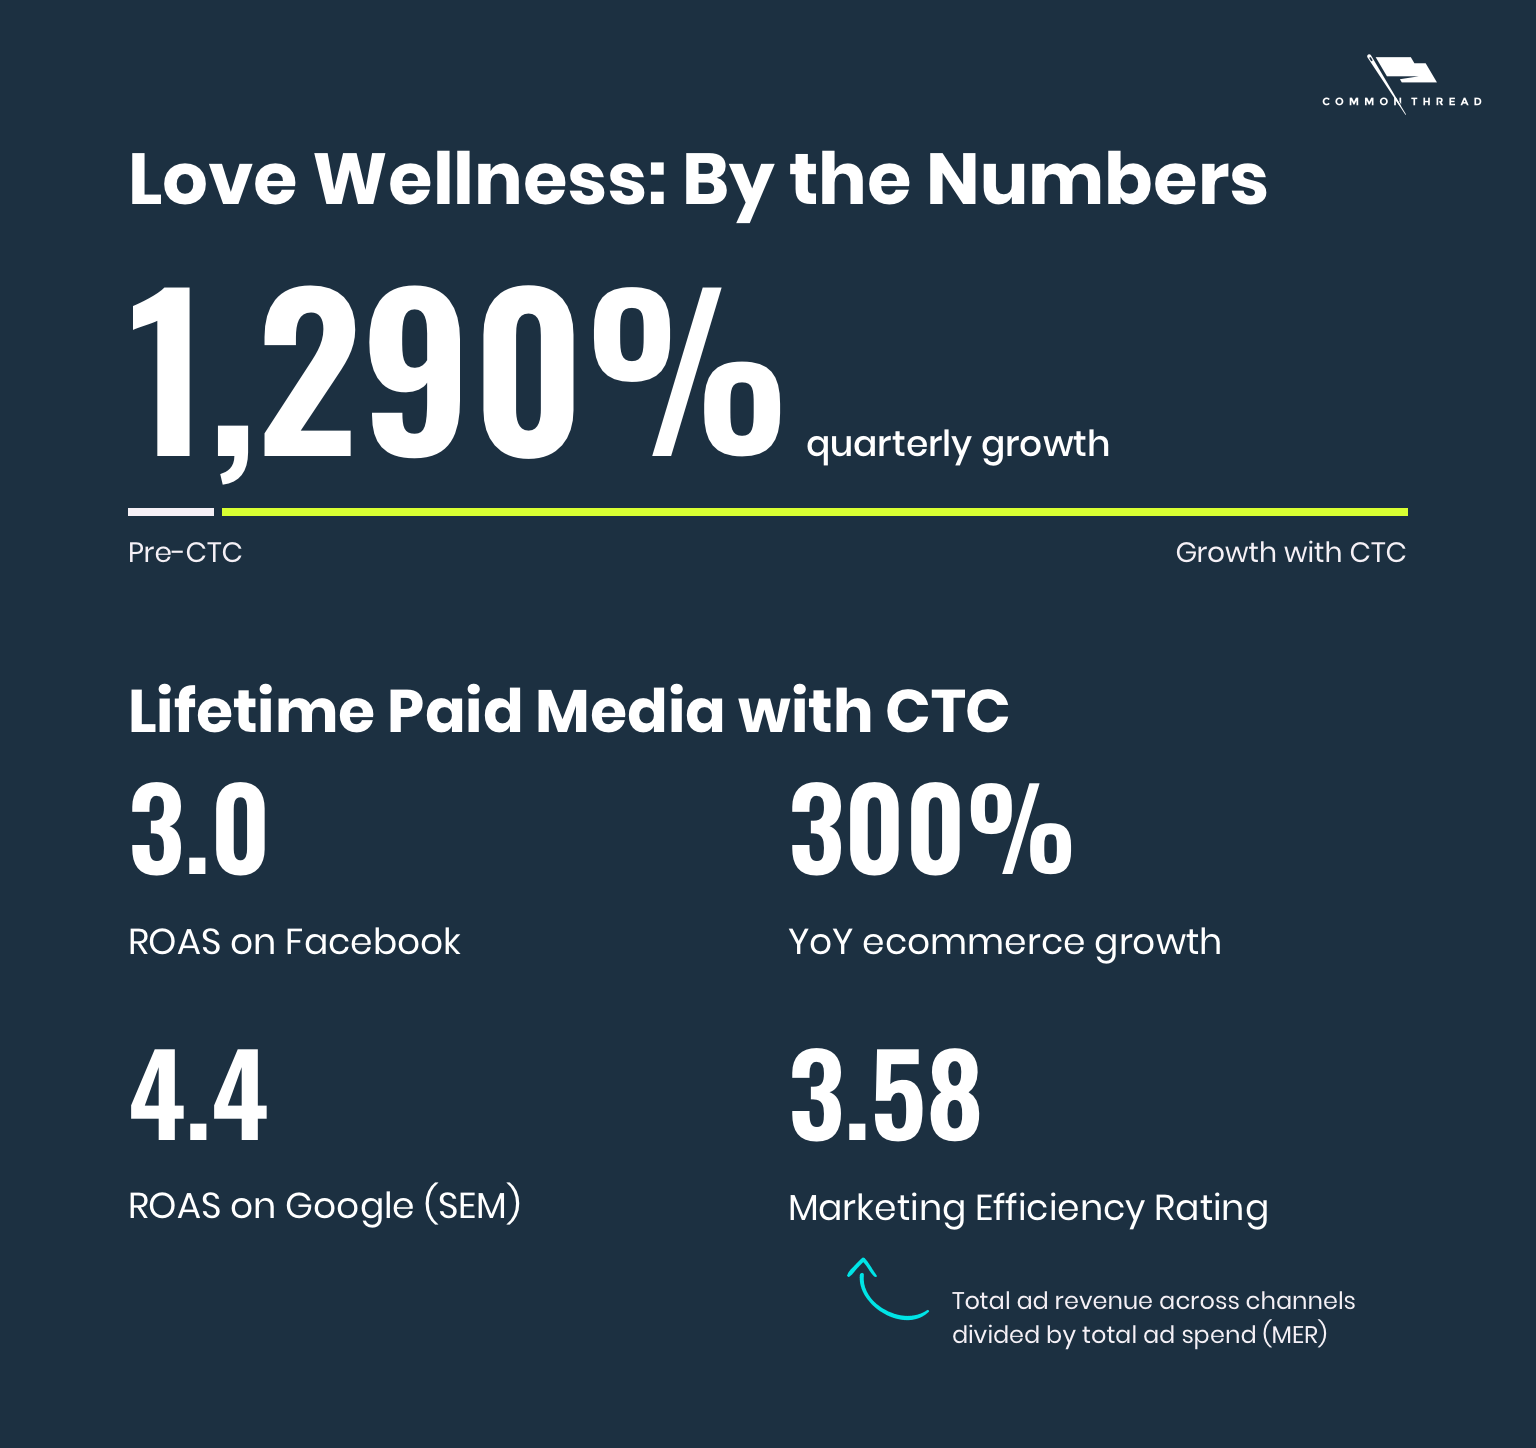 Love Wellness: By the Numbers